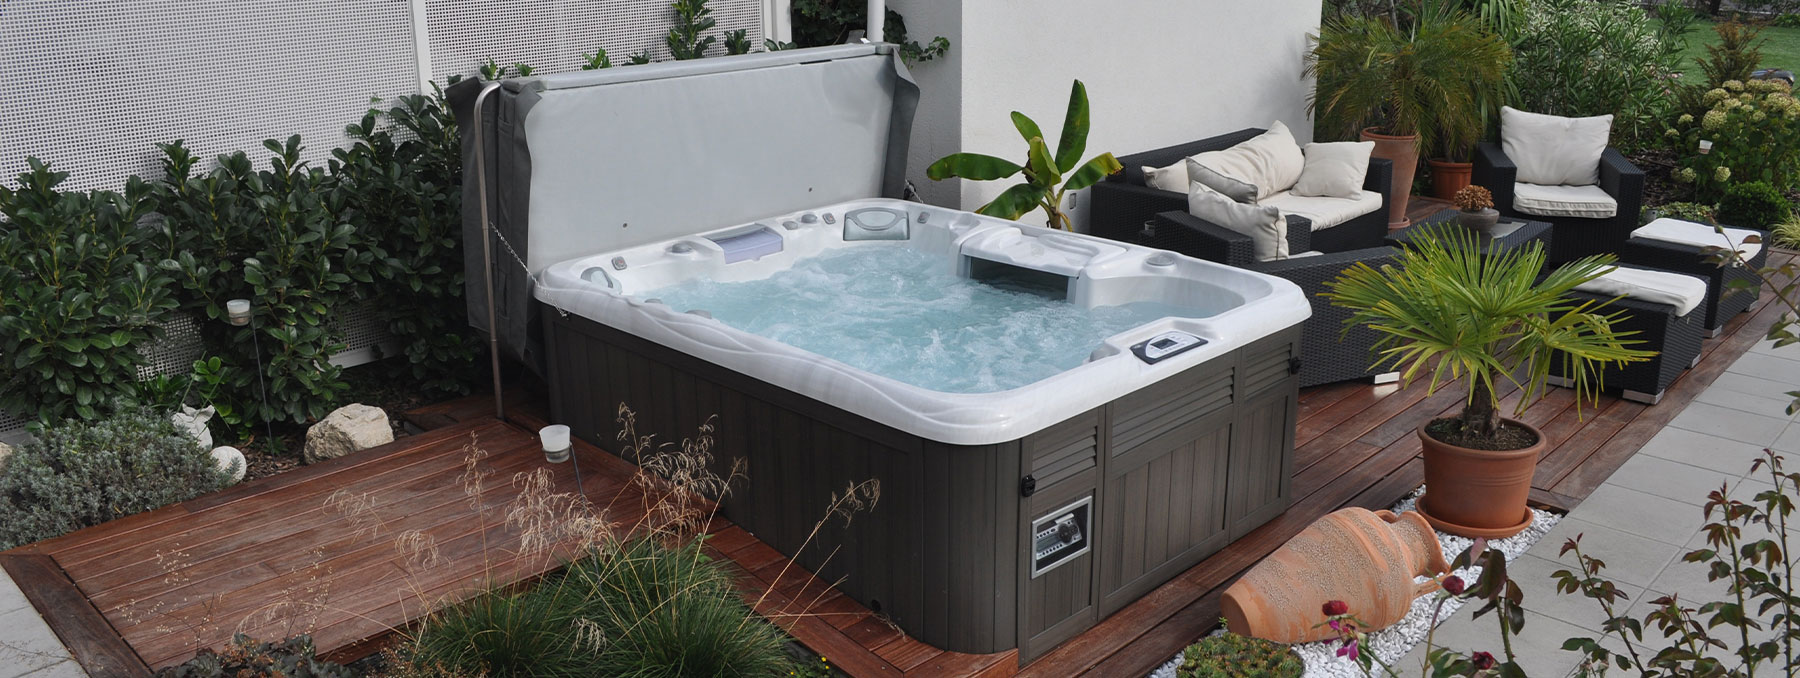 Can I try the hot tub before buying yet?